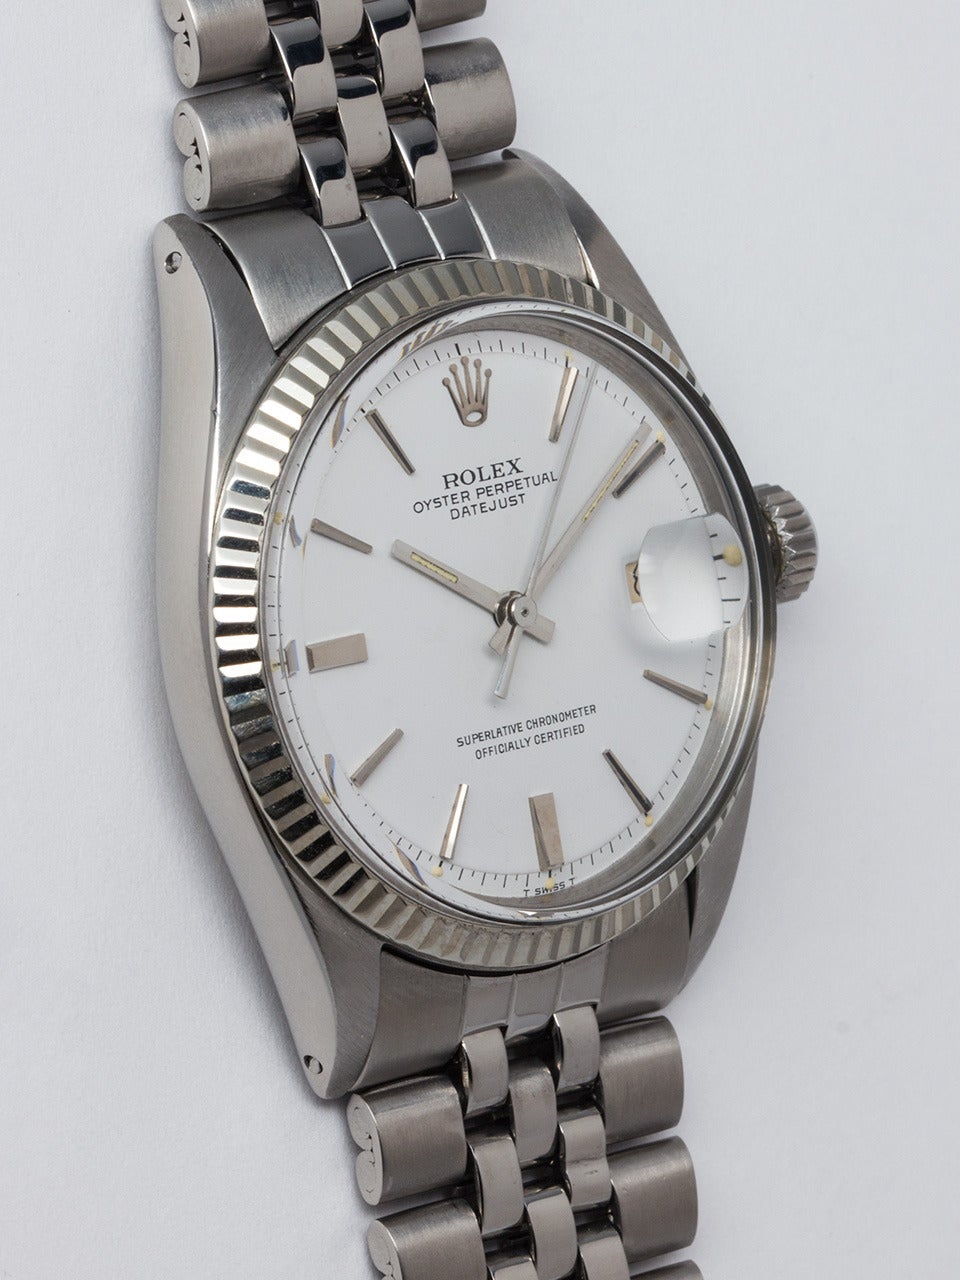 Rolex Stainless Steel Datejust Wristwatch ref 1601 serial #9.5 million circa 1963. 36mm diameter case with 14K white gold fluted bezel and acrylic crystal. Original white pie pan dial with applied silver indexes and silver baton hands. Powered by